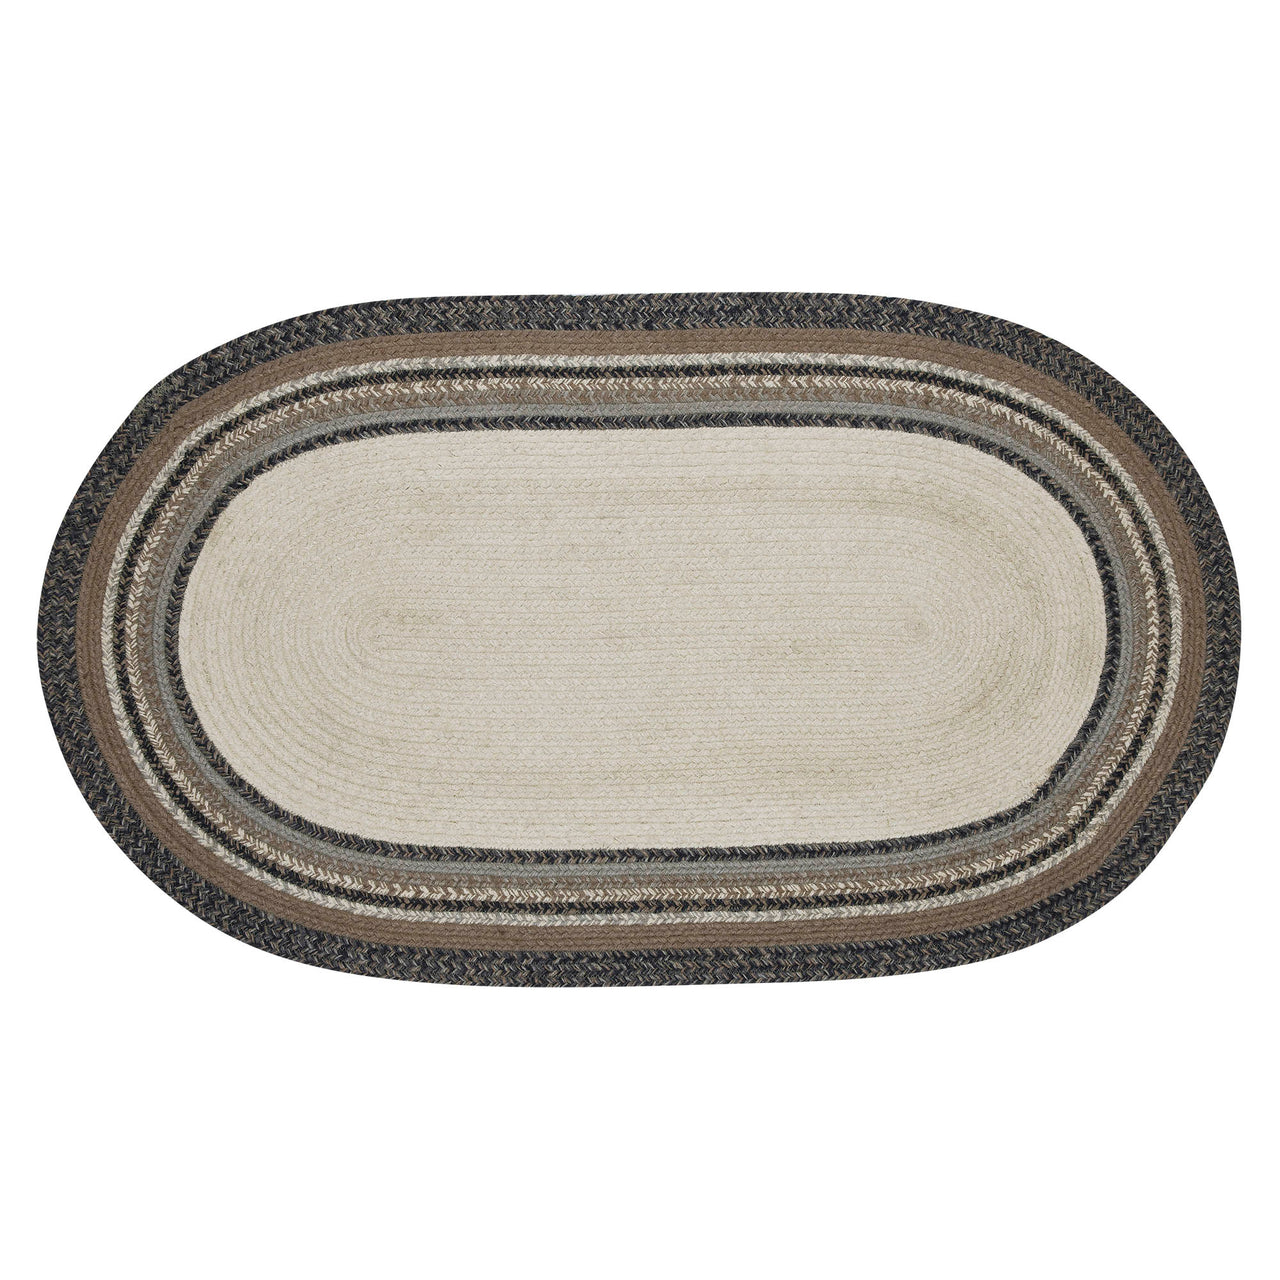 Floral Vine Jute Braided Rug Oval with Rug Pad 27"x48" VHC Brands